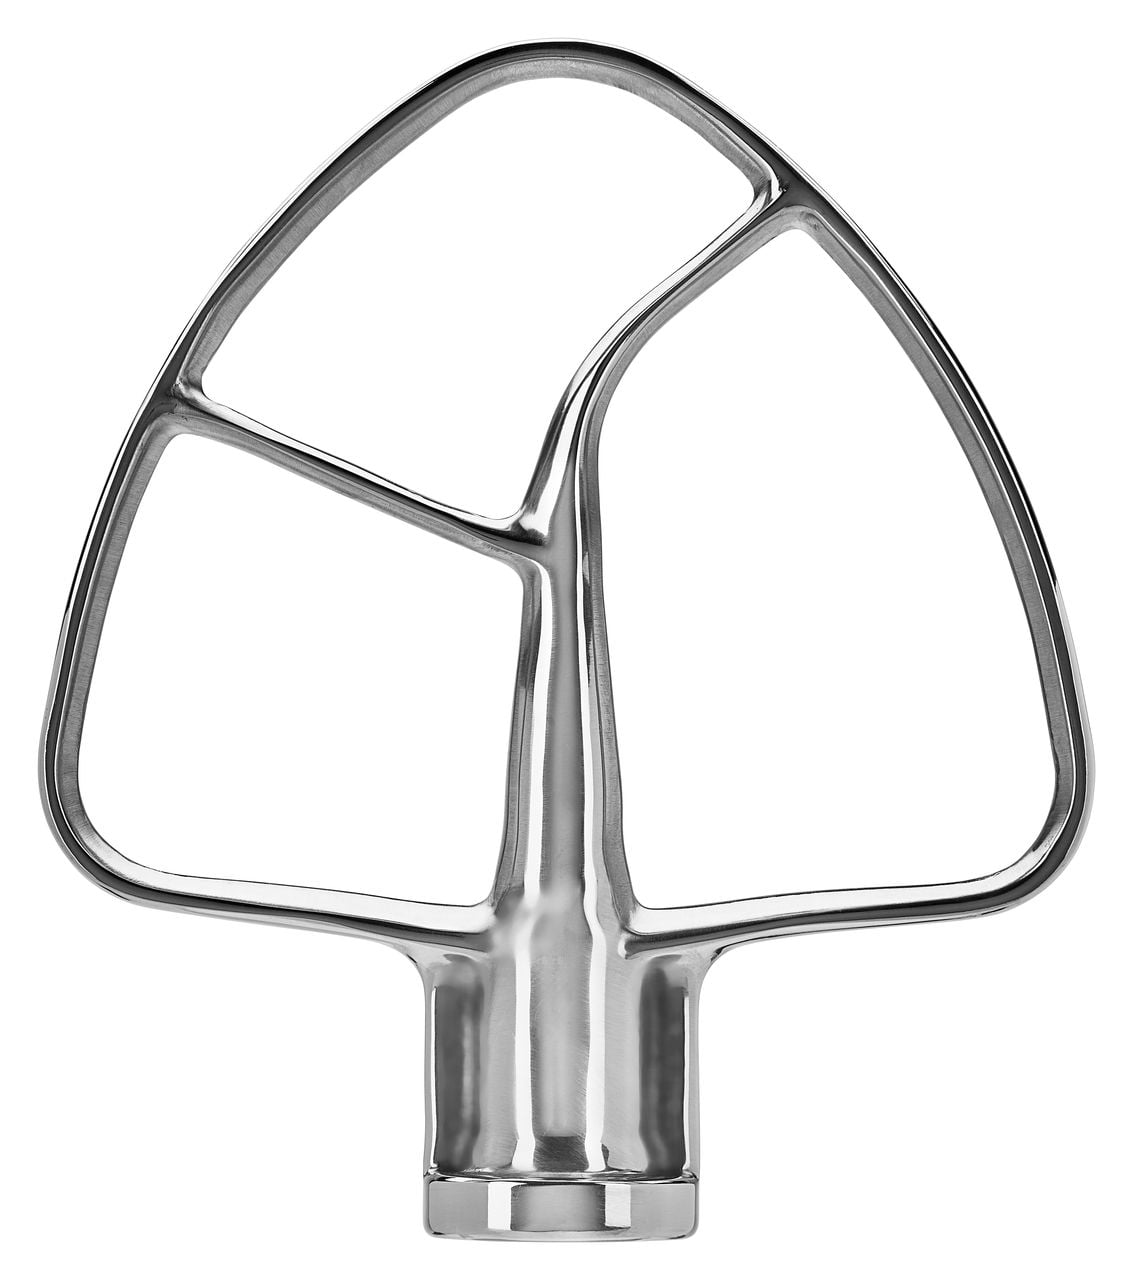 Stainless Steel Flat Beater for KitchenAid 5qt-6qt Bowl-Lift Stand Mixer,  Fit for Professional 5 Plus and Professional 600 Seris Mixer K5 KG25 KV25